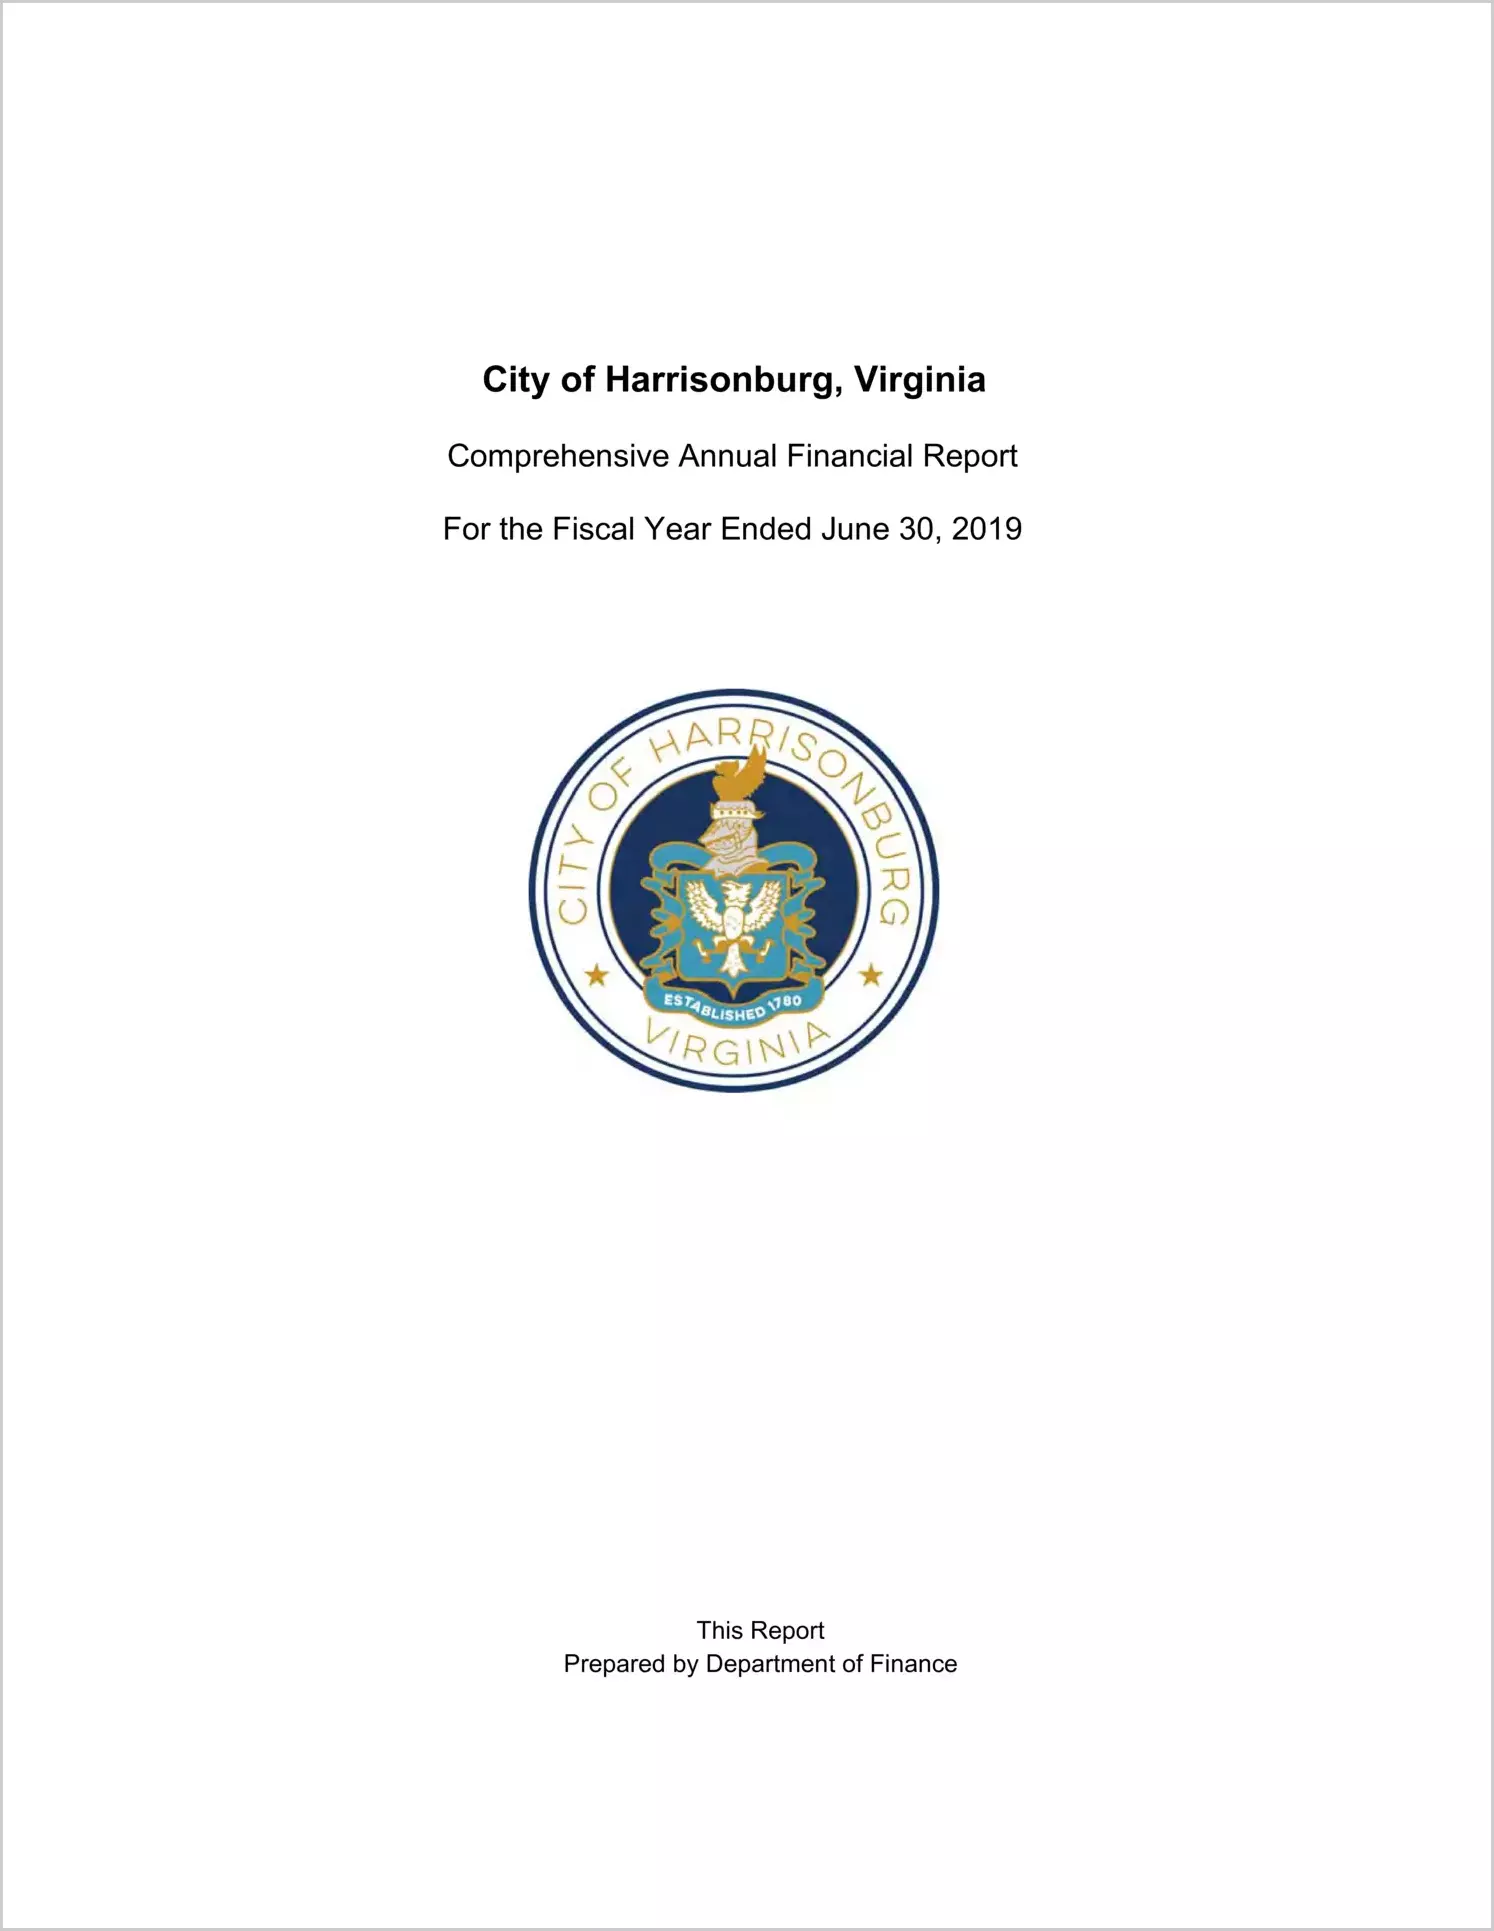 2019 Annual Financial Report for City of Harrisonburg